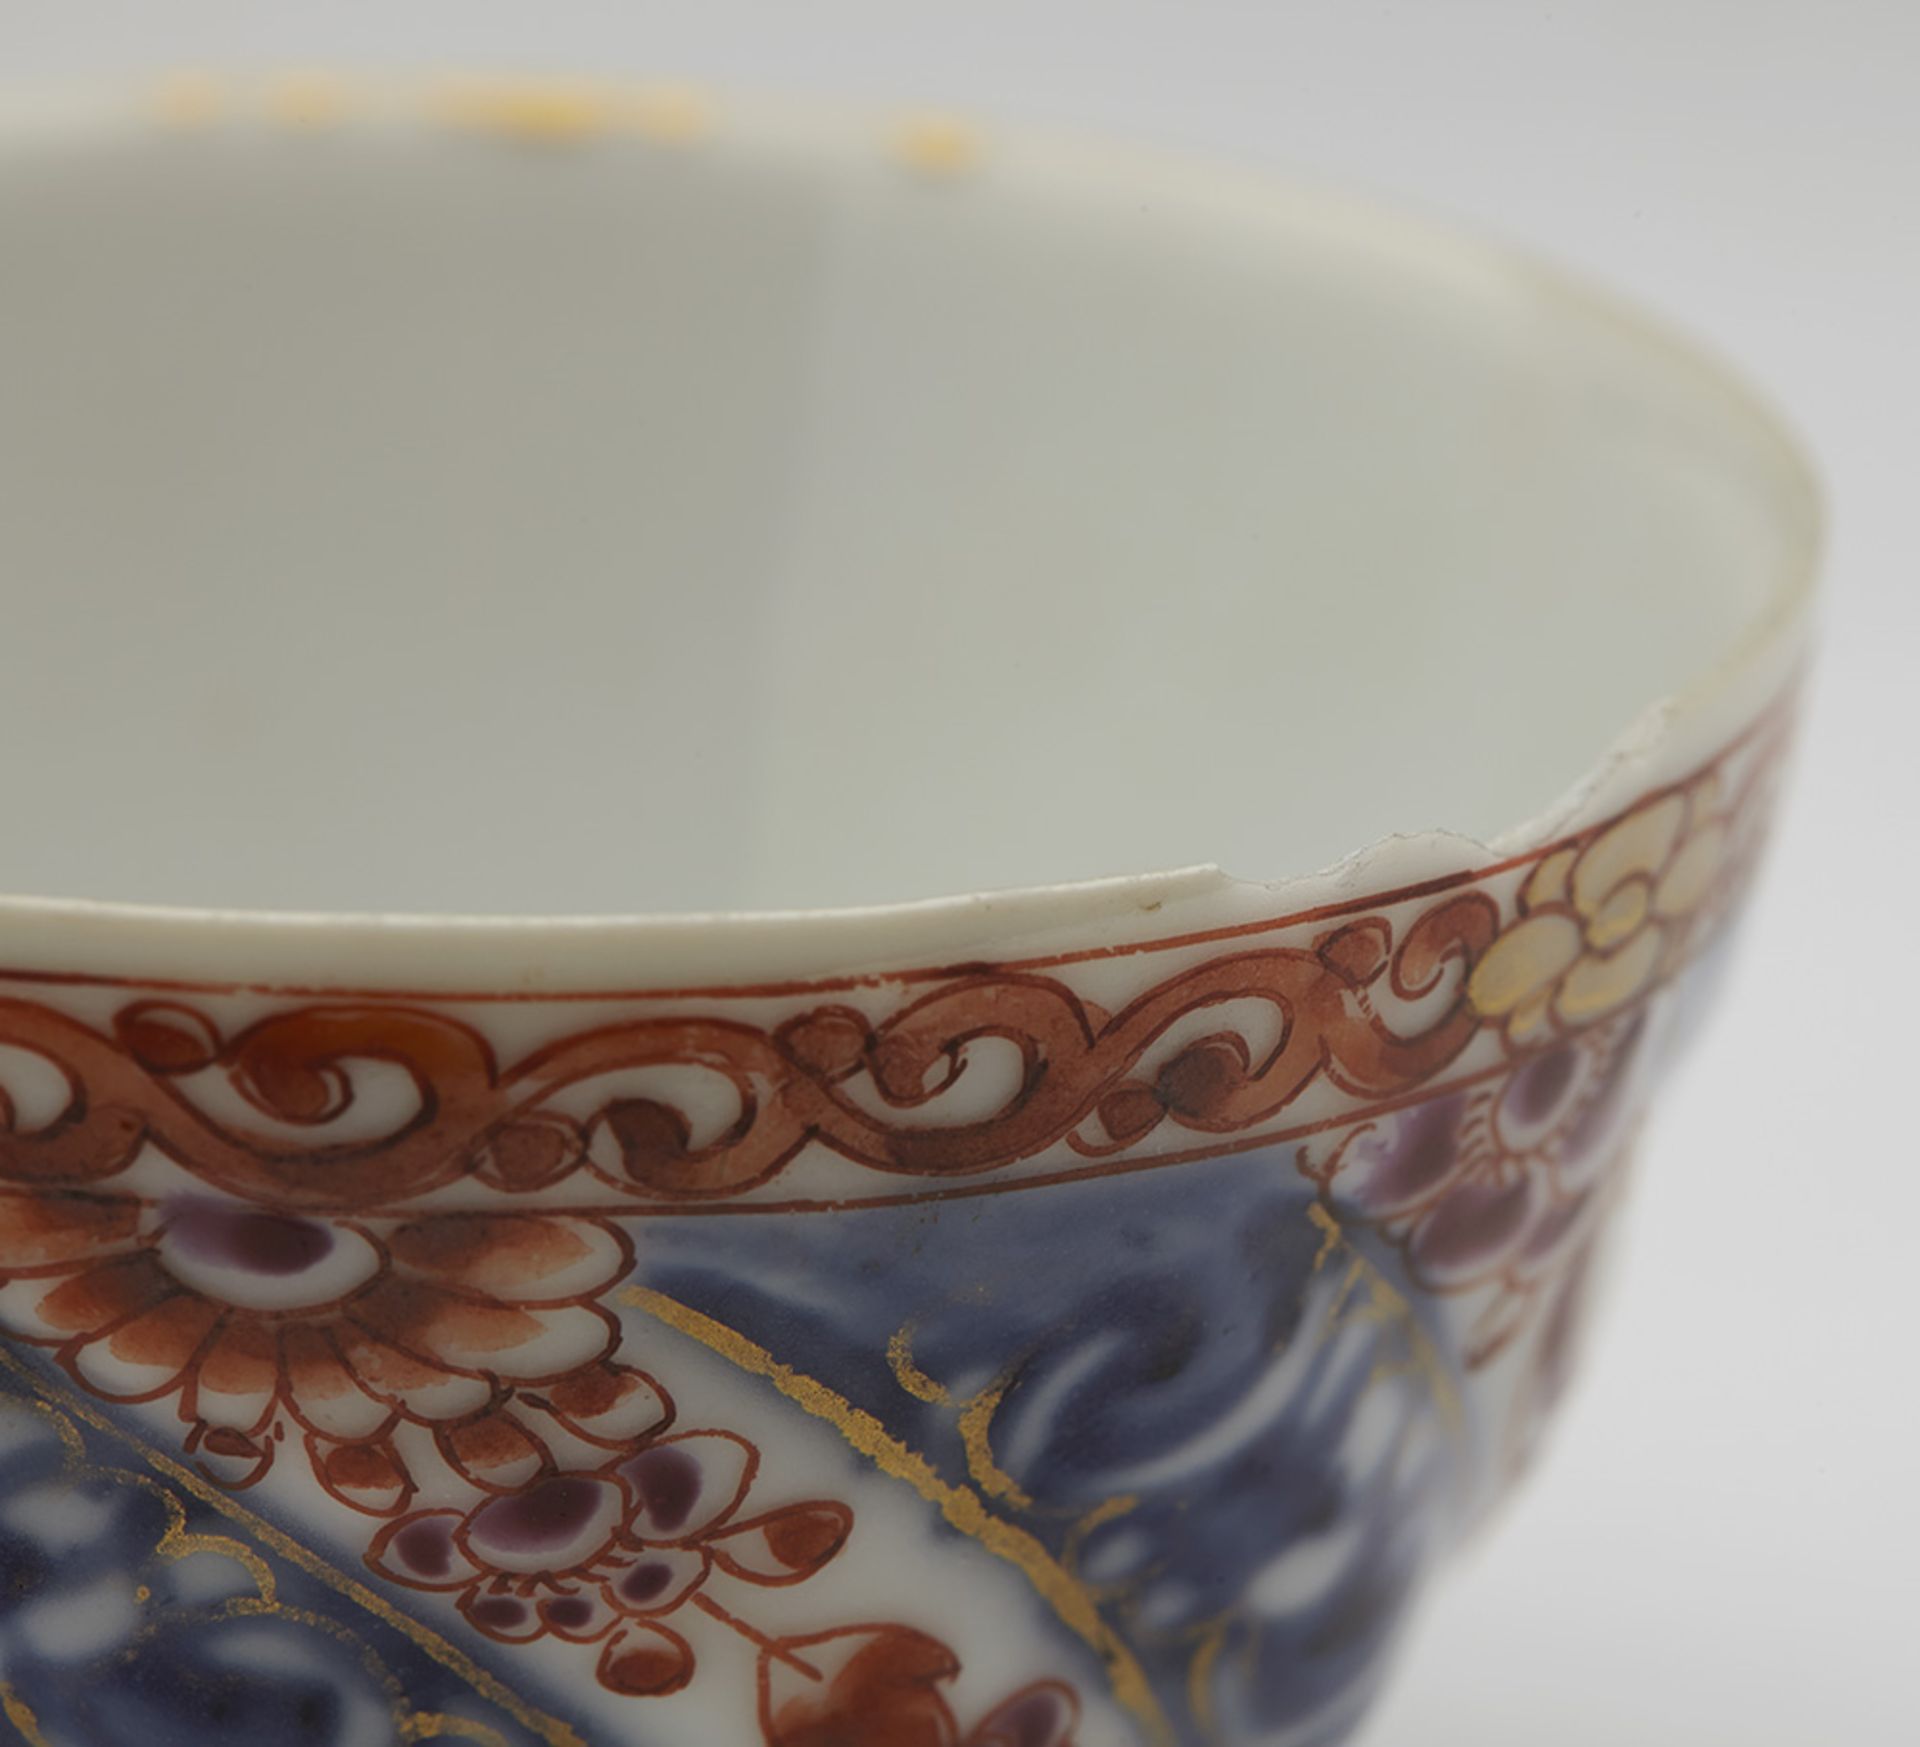 ANTIQUE CHINESE KANGXI QUEEN CHARLOTTE PATTERN TEA BOWL & SAUCER 18TH C. - Image 6 of 10